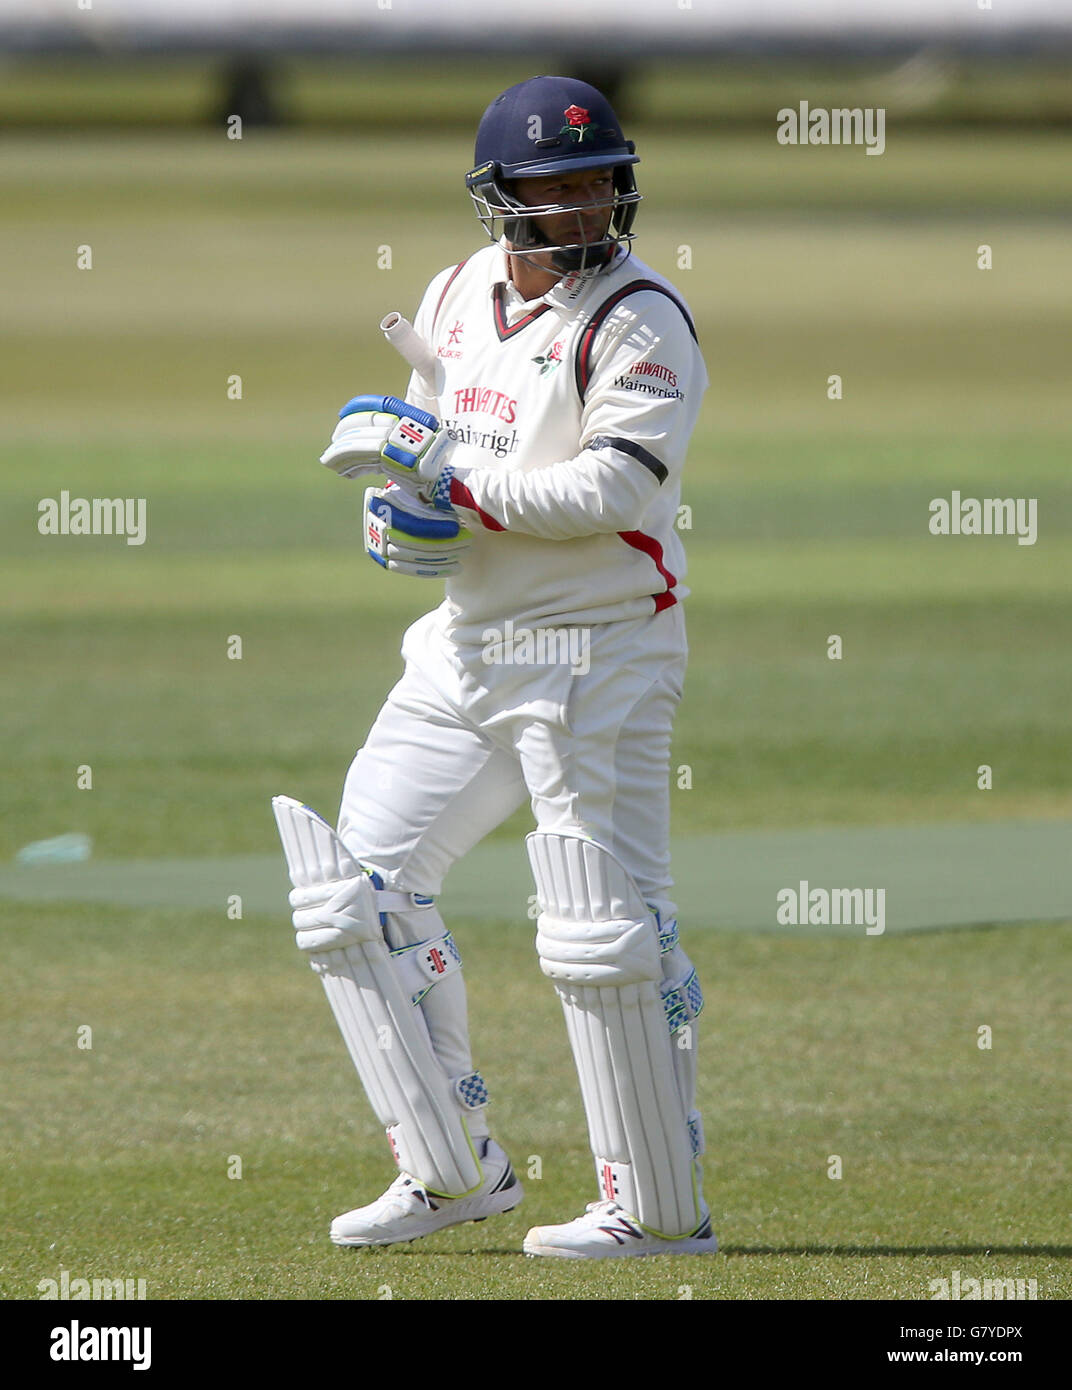 Lancashire's Ashwell Prince looks back as he is dismissed on 153 during the LV County Championship, Division Two match at The County Ground, Northamptonshire. Stock Photo